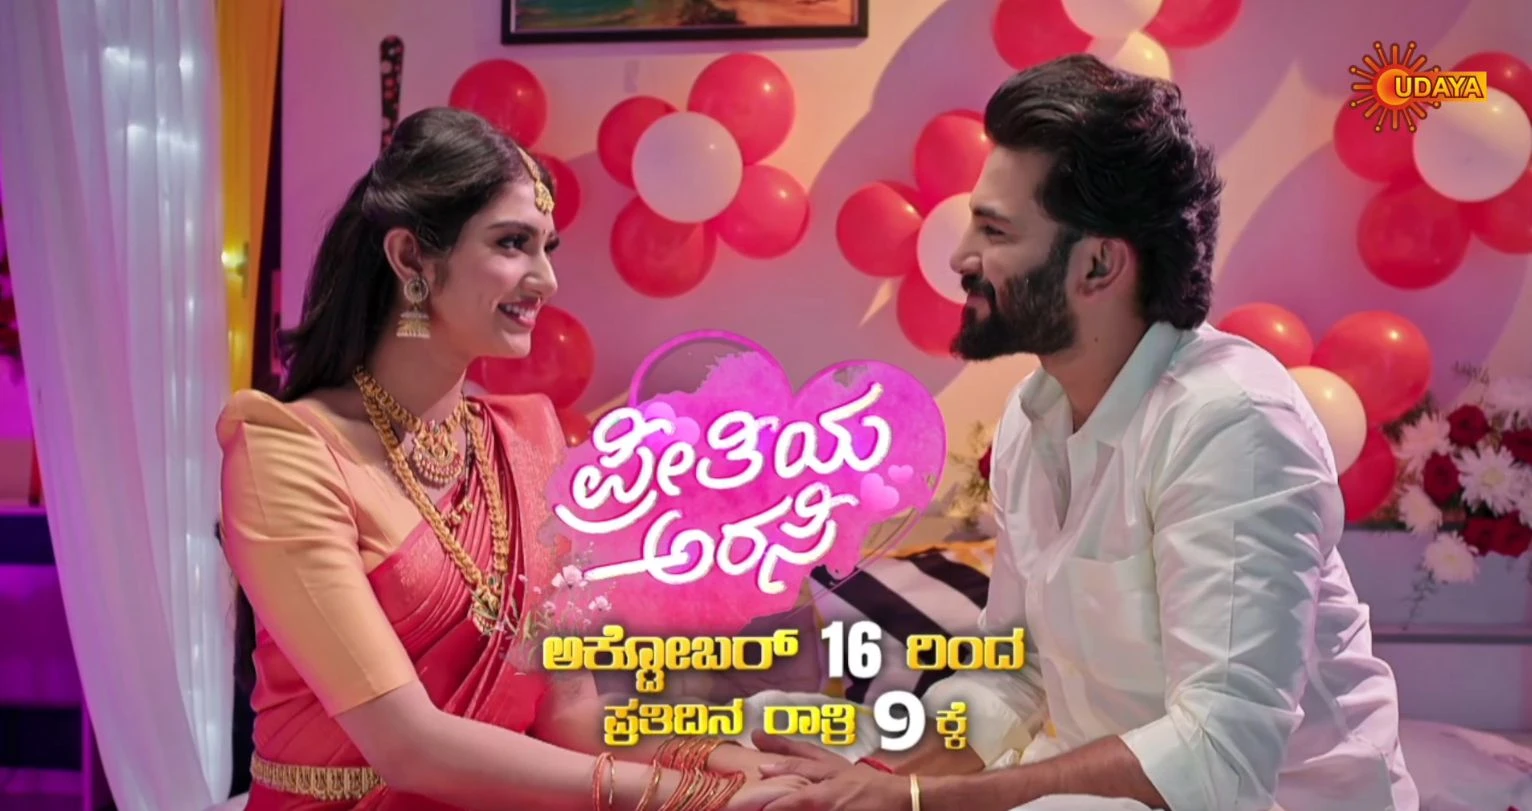 Kanmani Kannada TV Serial On Udaya TV Starting From 19th march Monday to Friday at 10.00 PM 6